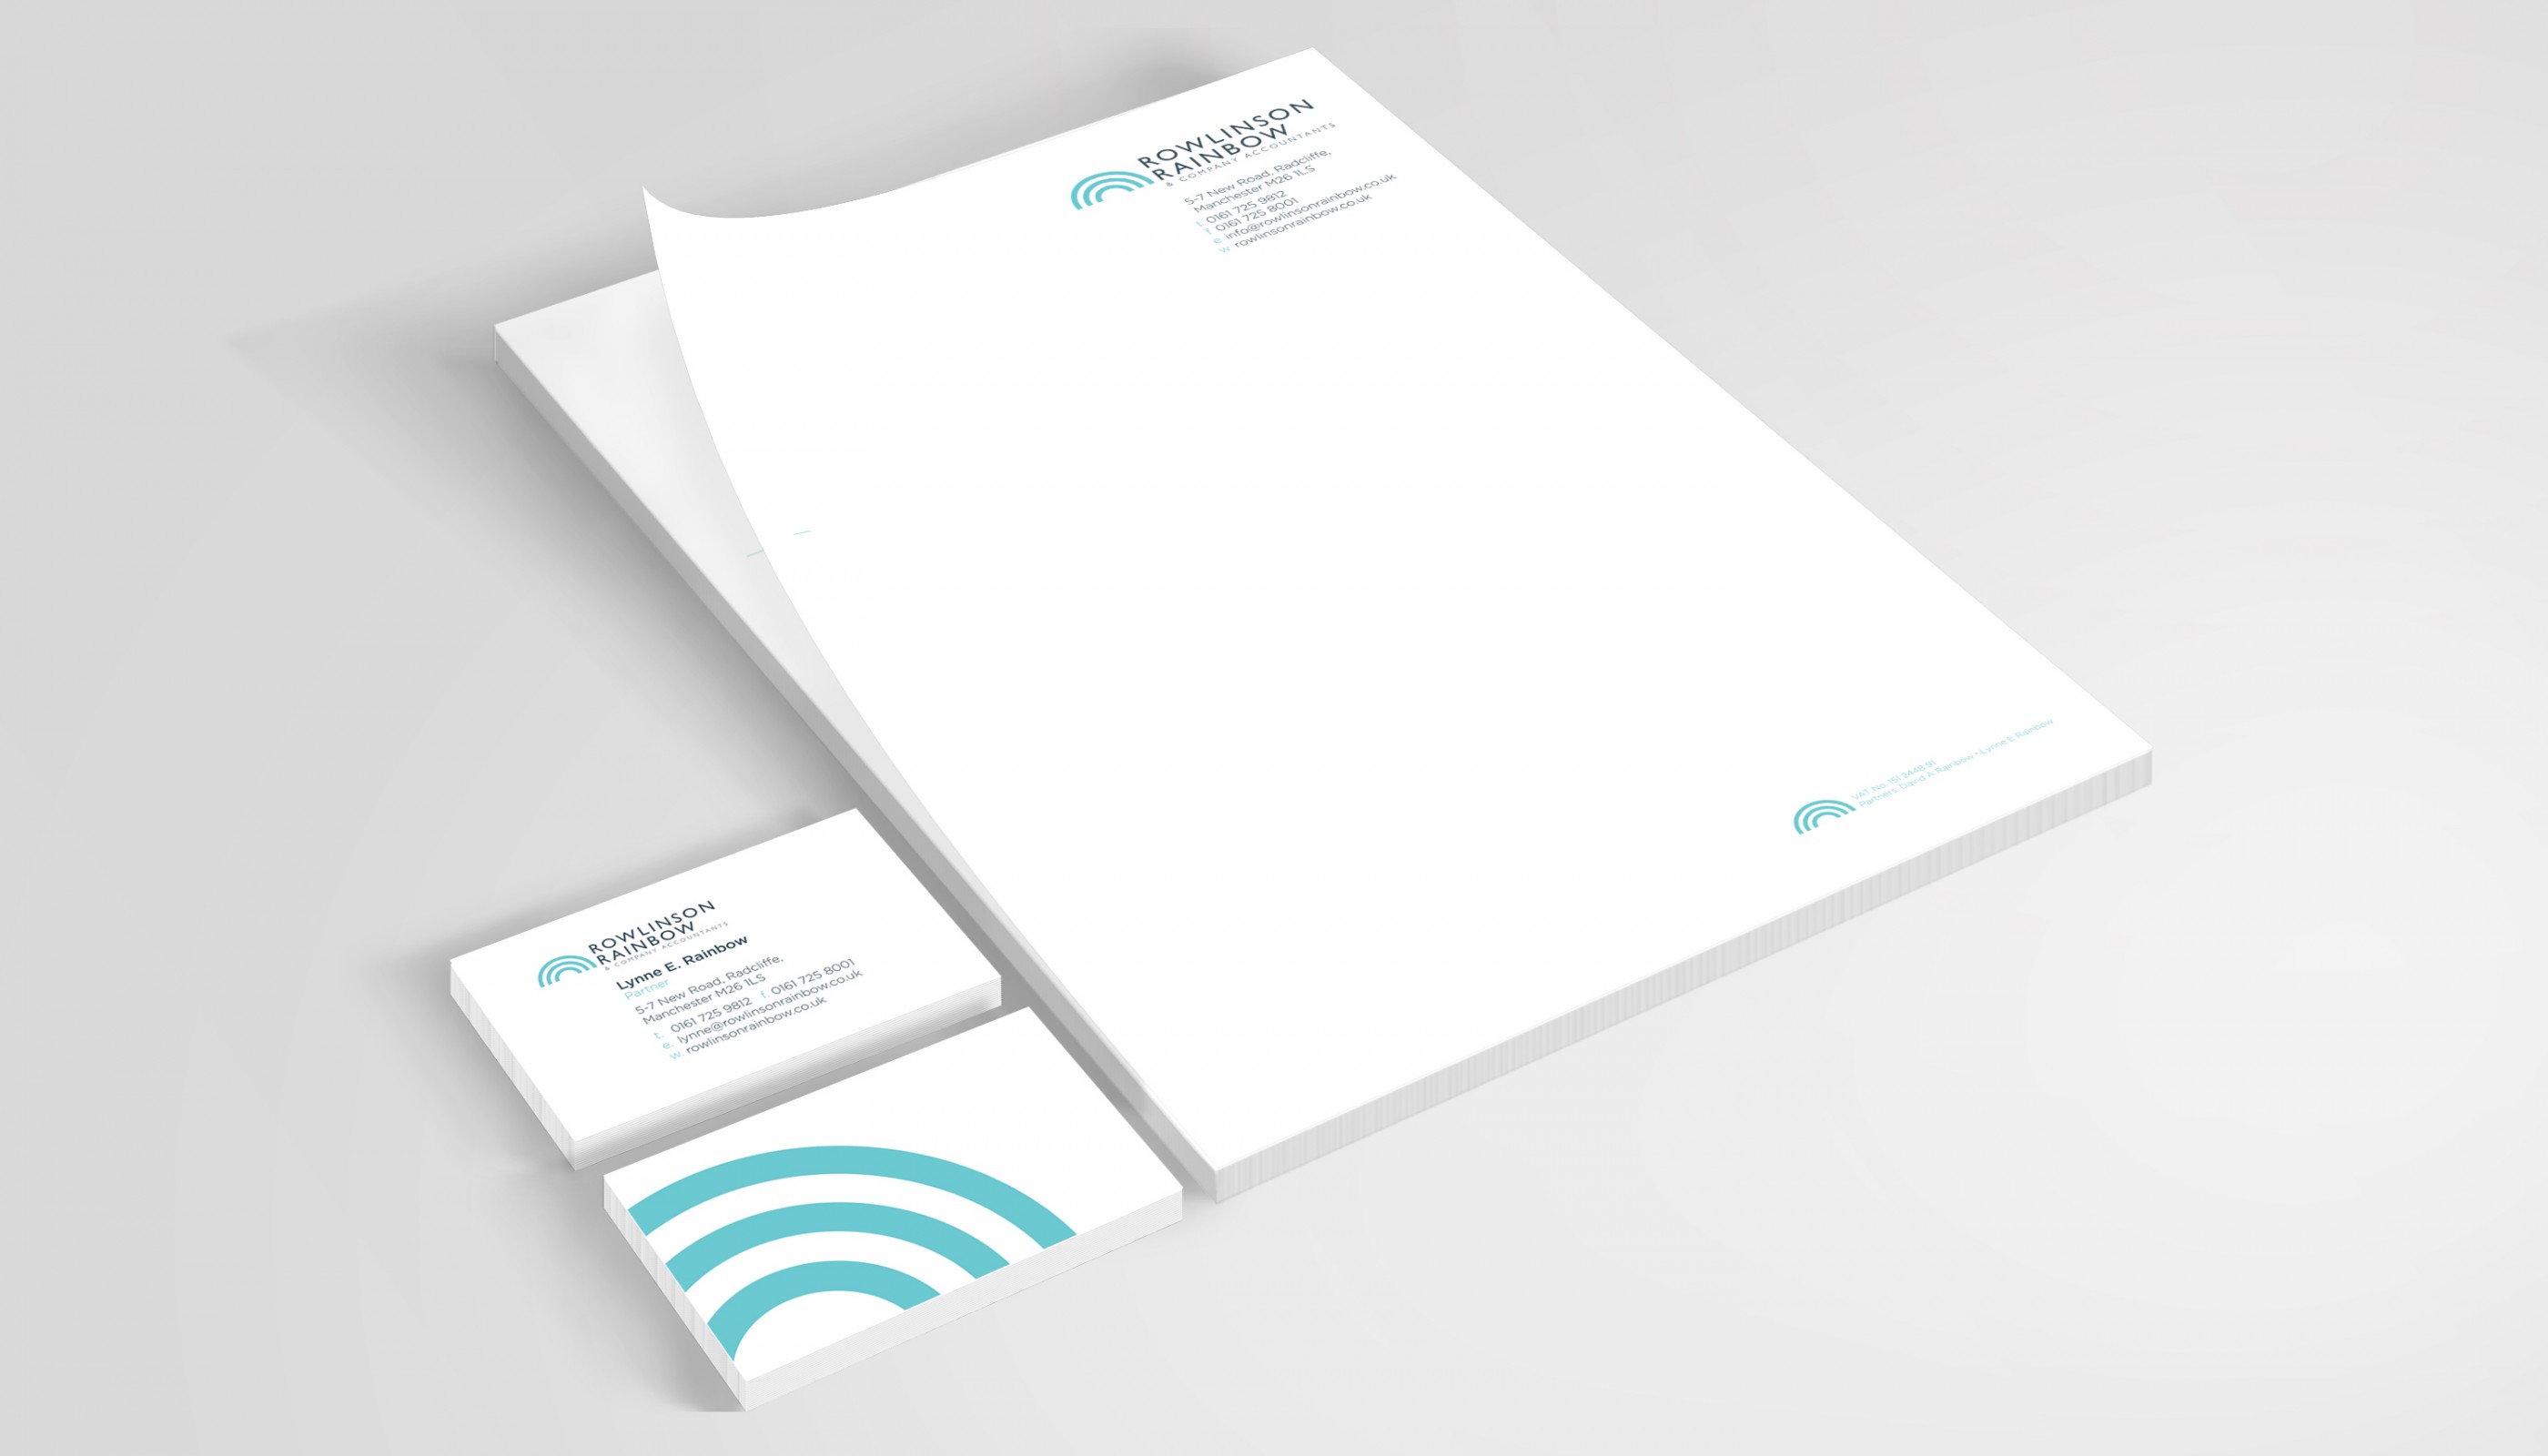 Letterheads and cards designed and printed for Radcliffe Accountants, Rowlinson Rainbow by local printing company Hypa Concept